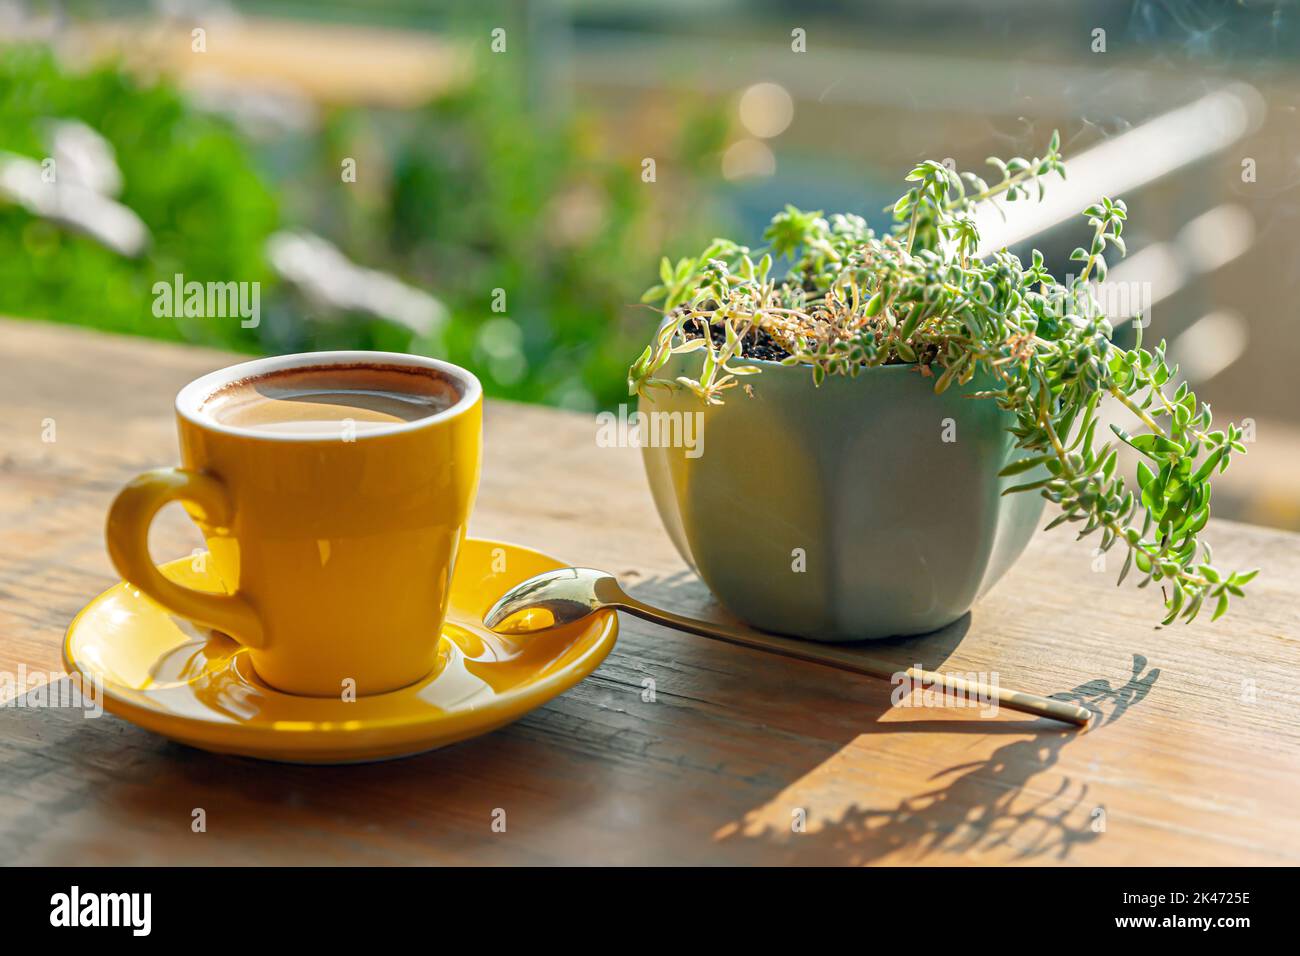 A cup of hot coffee is next to a potted plant on a wooden table, in the afternoon sunlight Stock Photo